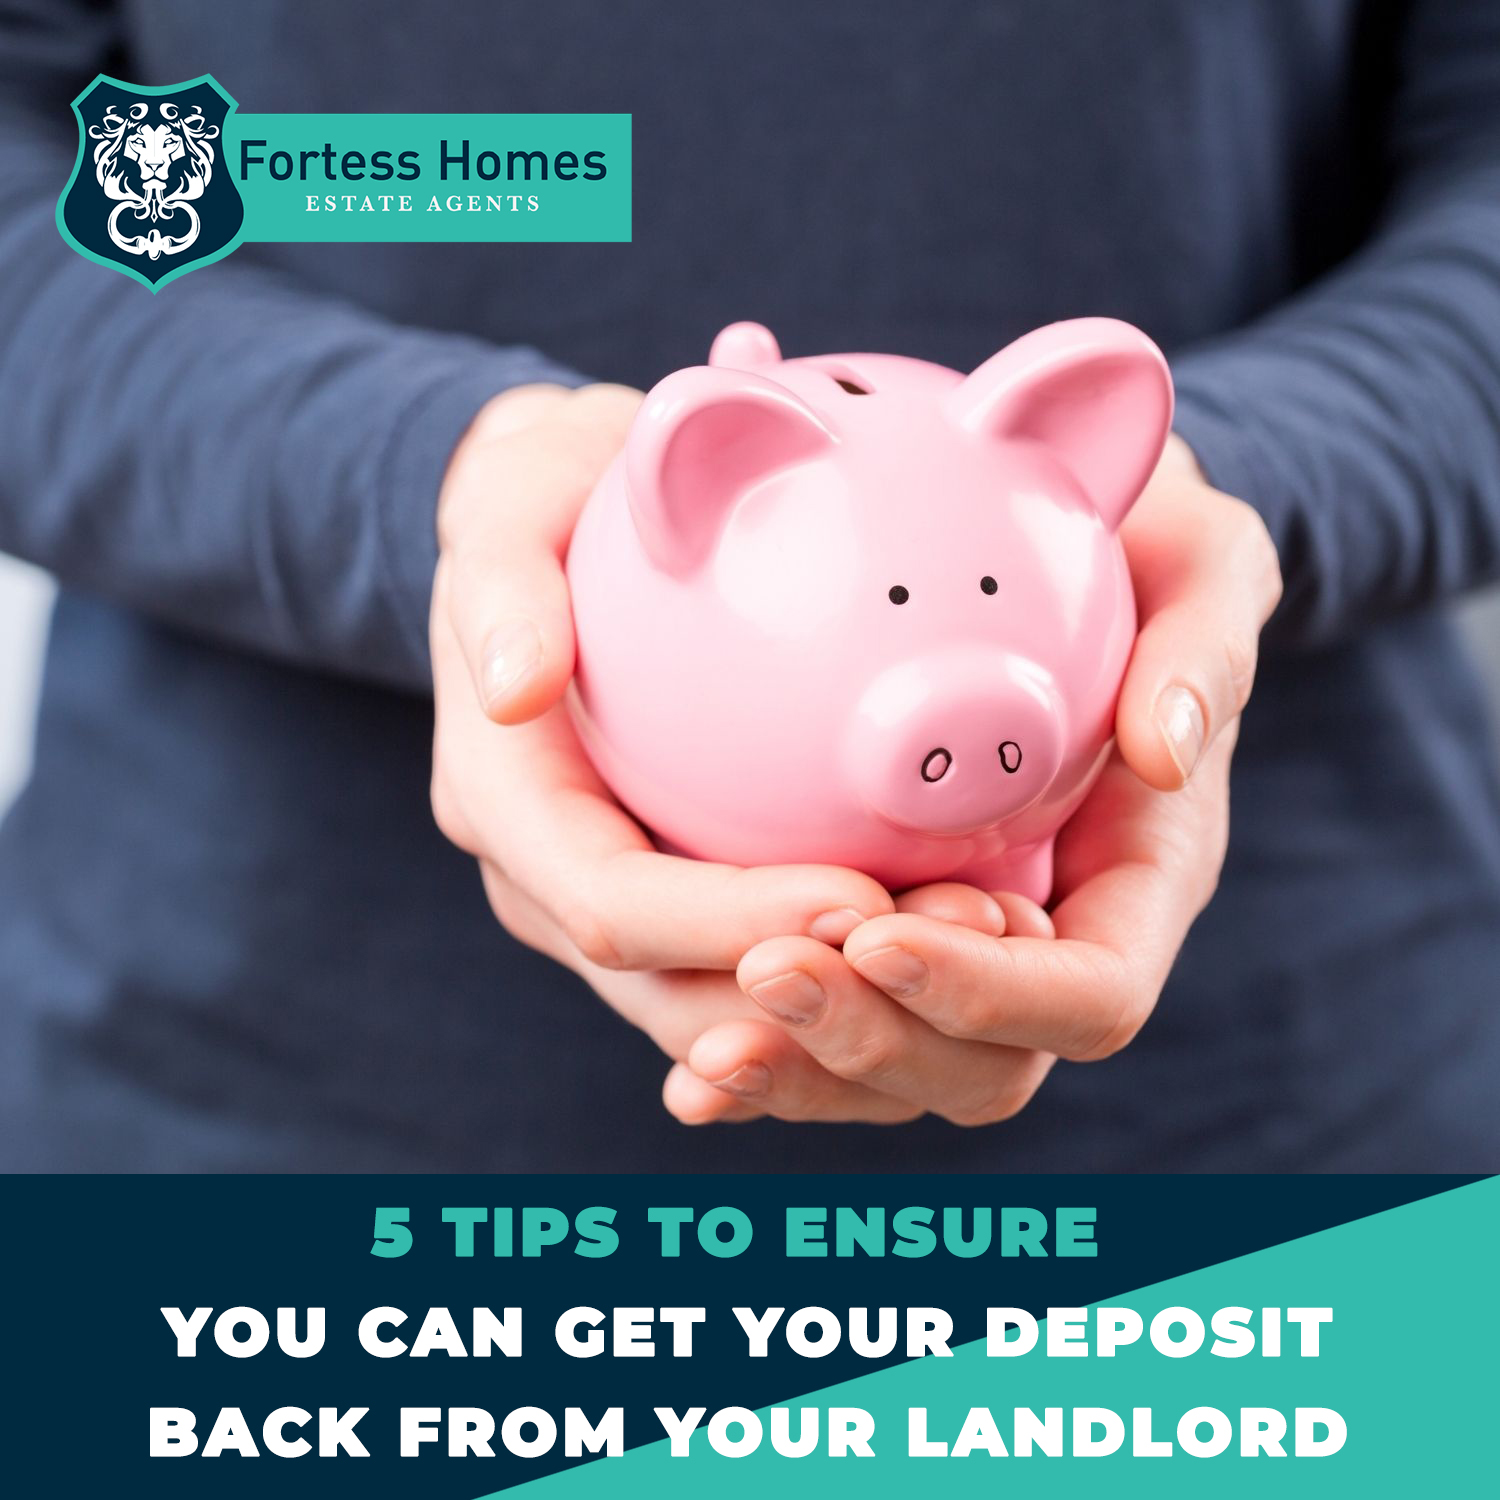 5 tips to ensure you can get your deposit back from your landlord